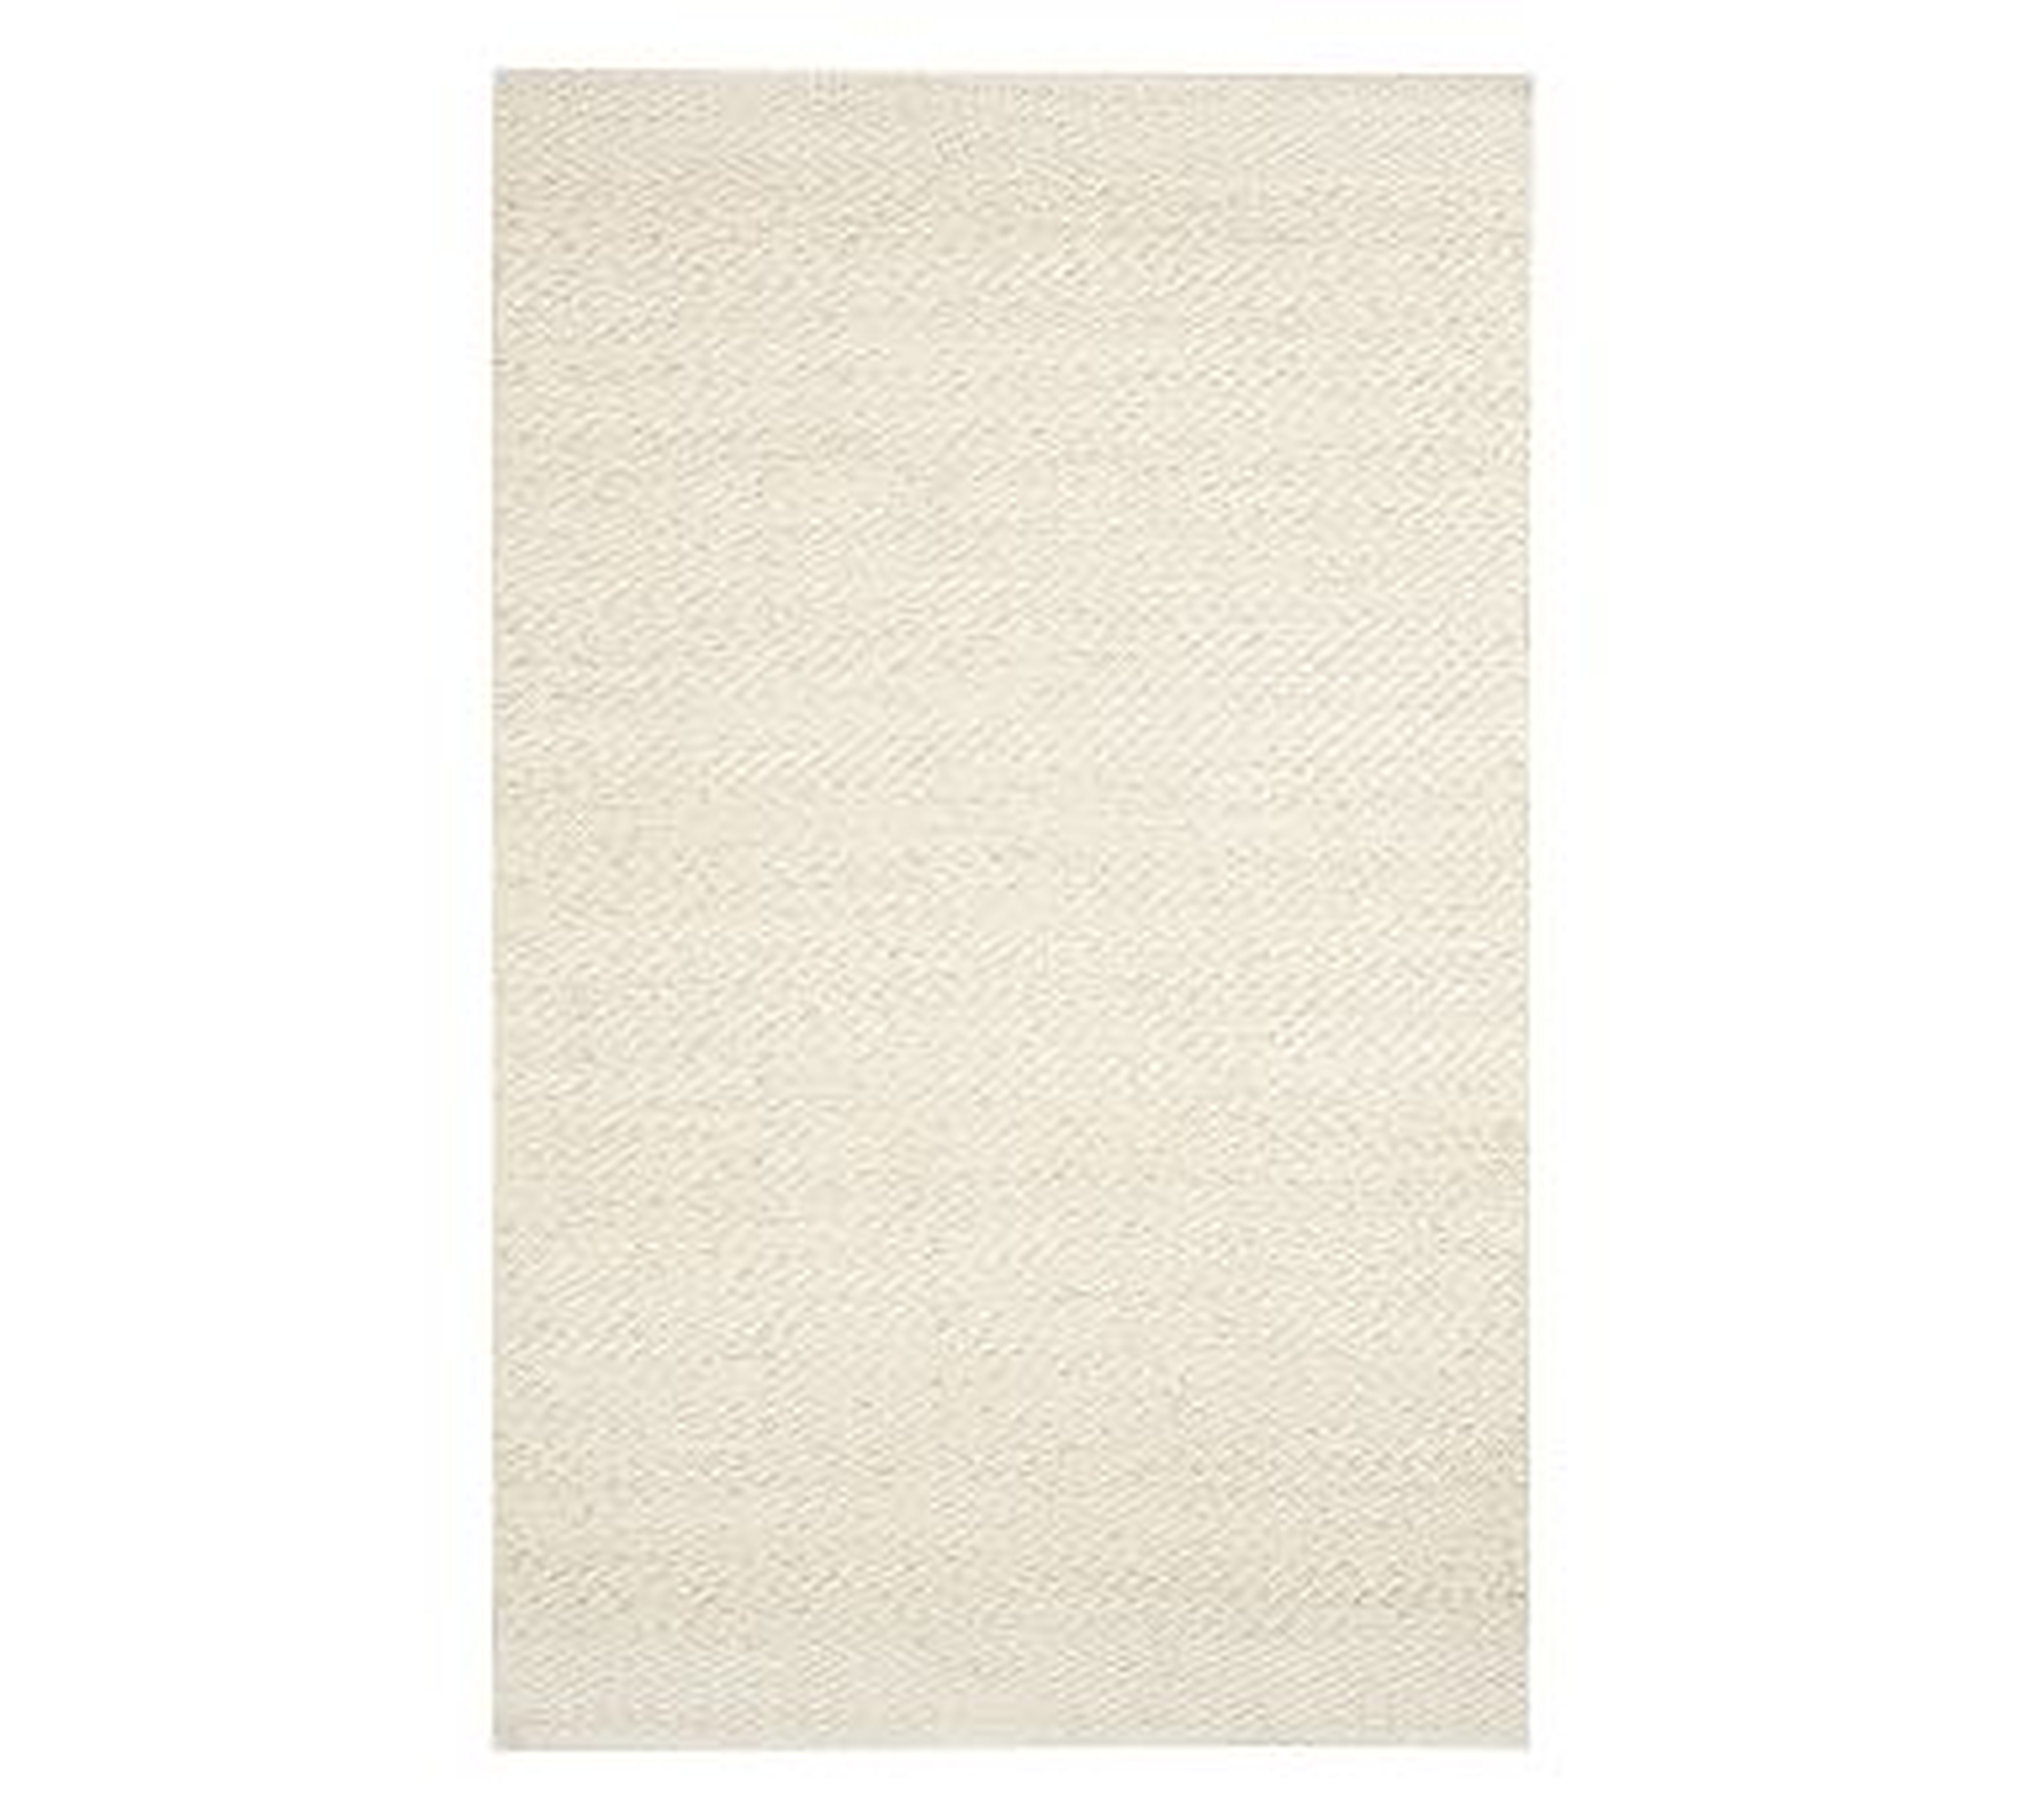 Twill Wool Jute Rug, 8x10', Ivory/Natural - Pottery Barn